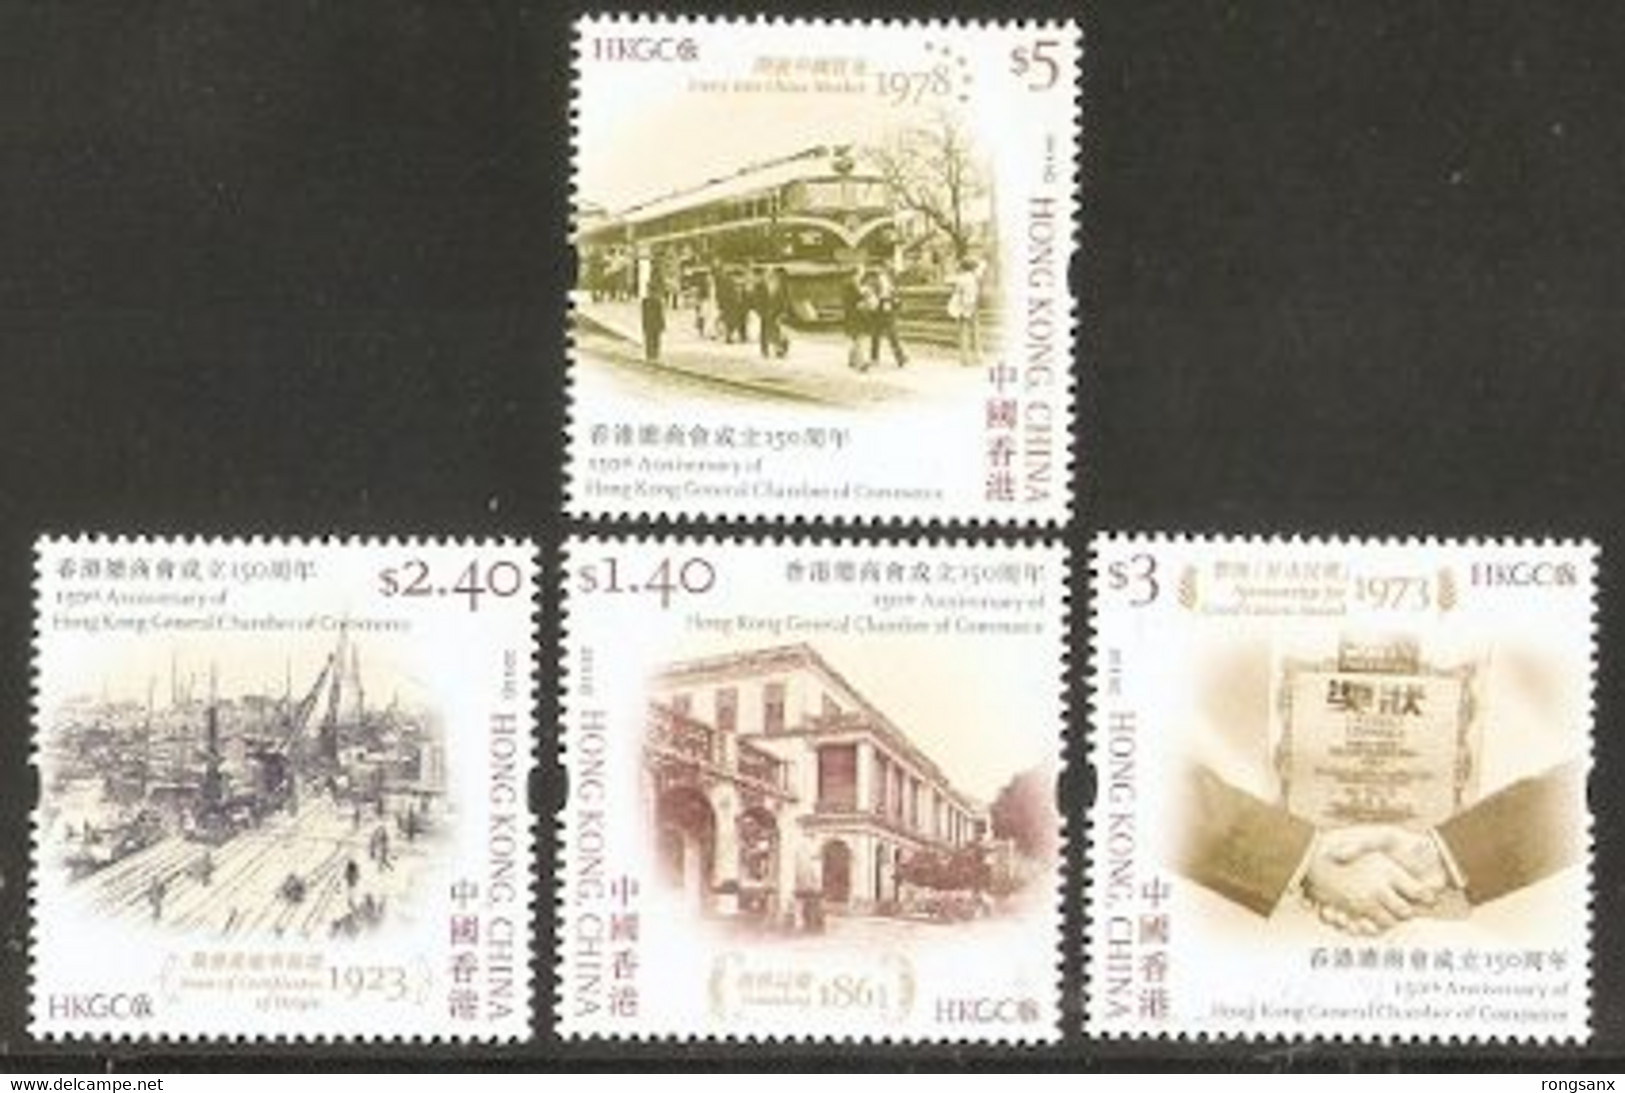 2011 HONG KONG 150 ANNI MERCHANT UNION 4V STAMP - Unused Stamps